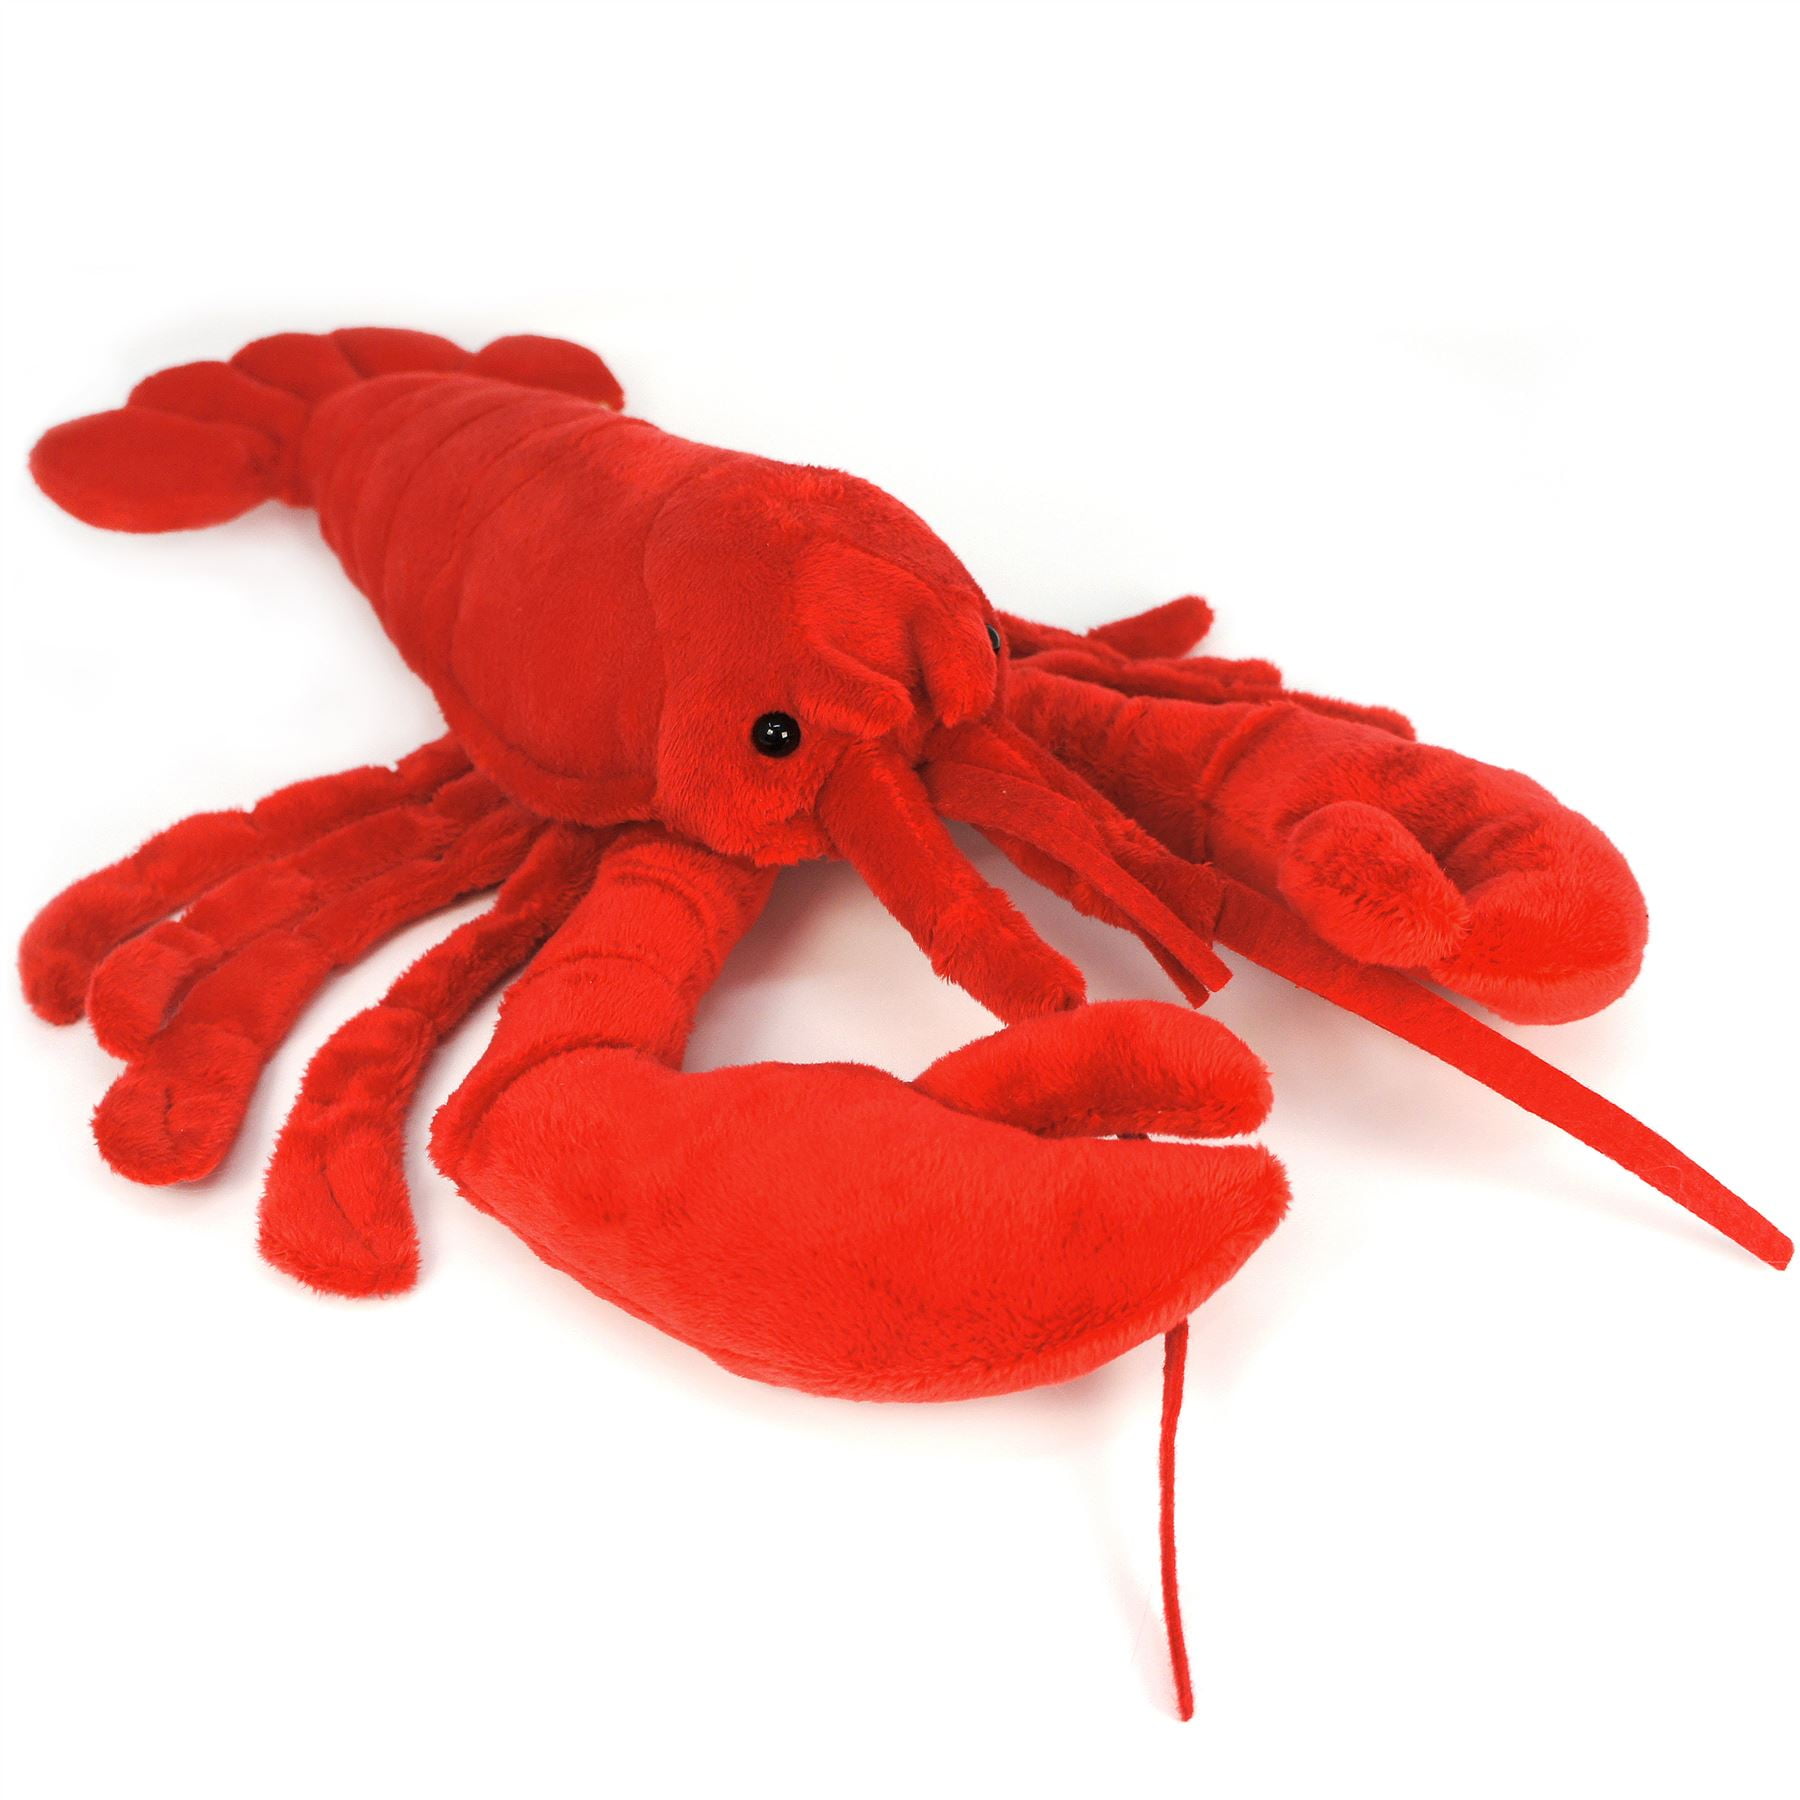 Lifelike Red Lobster Plush Toy Huggable American Lobster Stuffed Animals Toys 